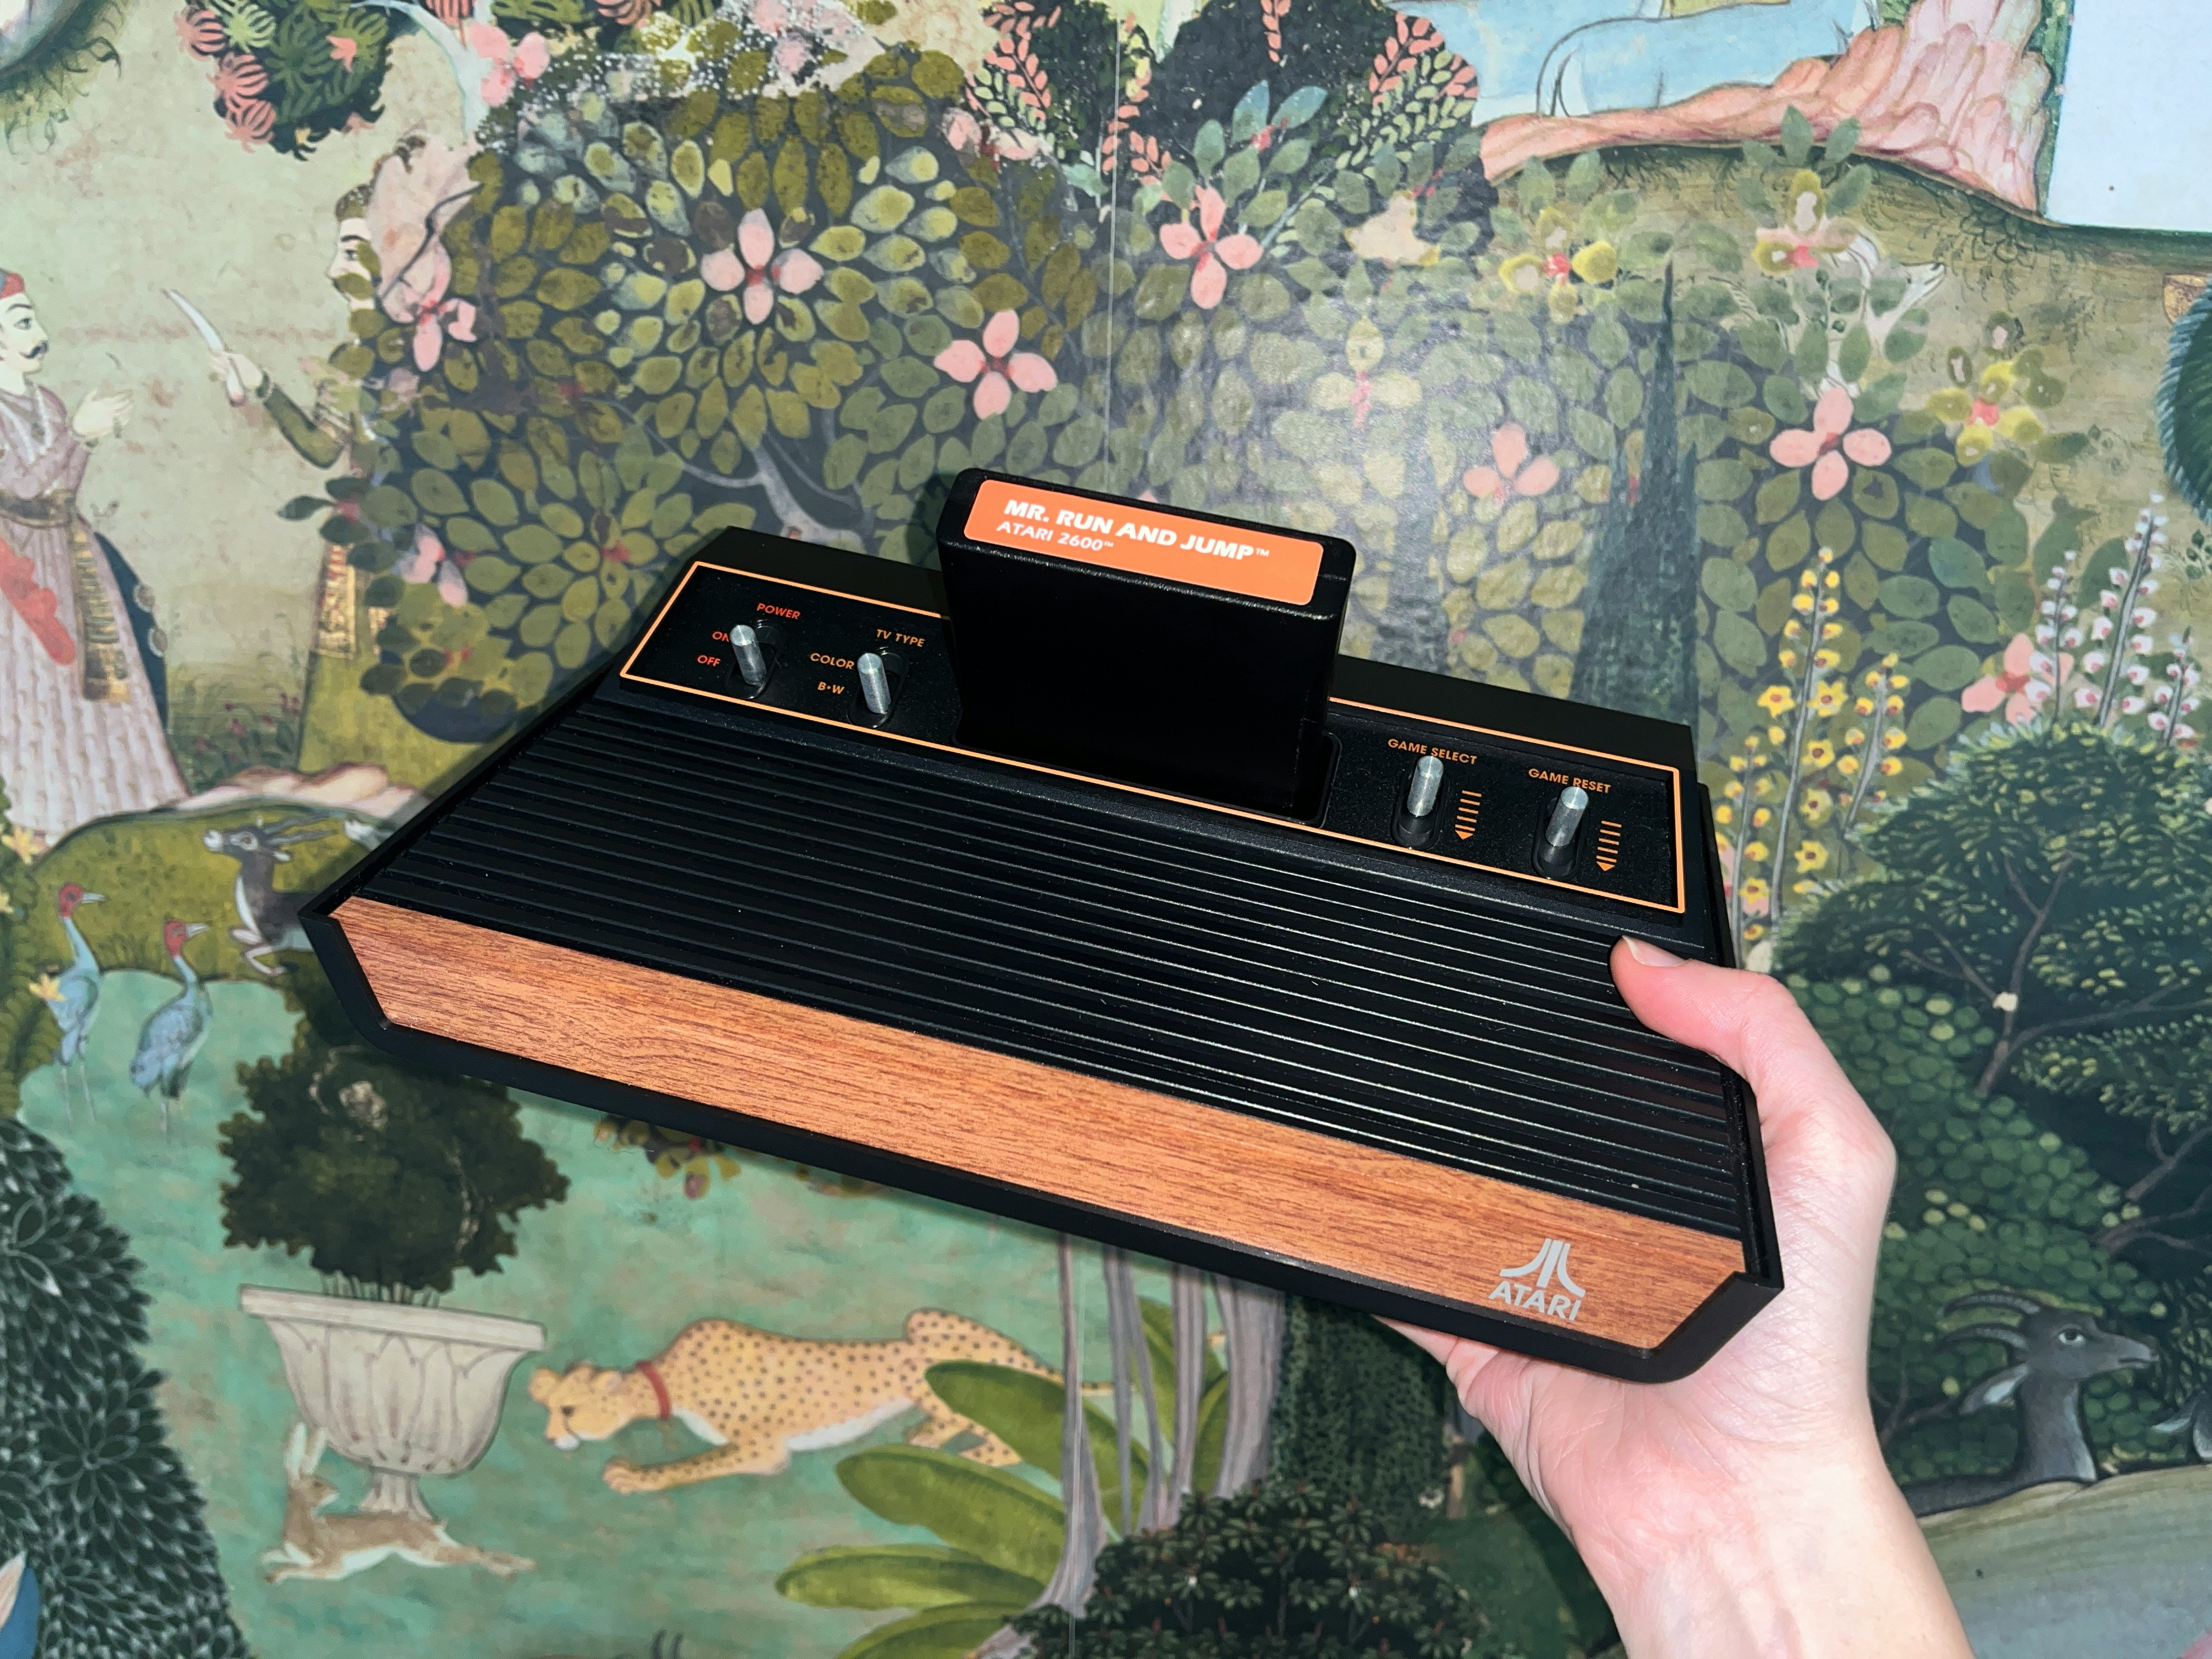 Atari 2600+ FULL REVIEW  Is the 2023 Console a Plus or a Minus? –  GenXGrownUp